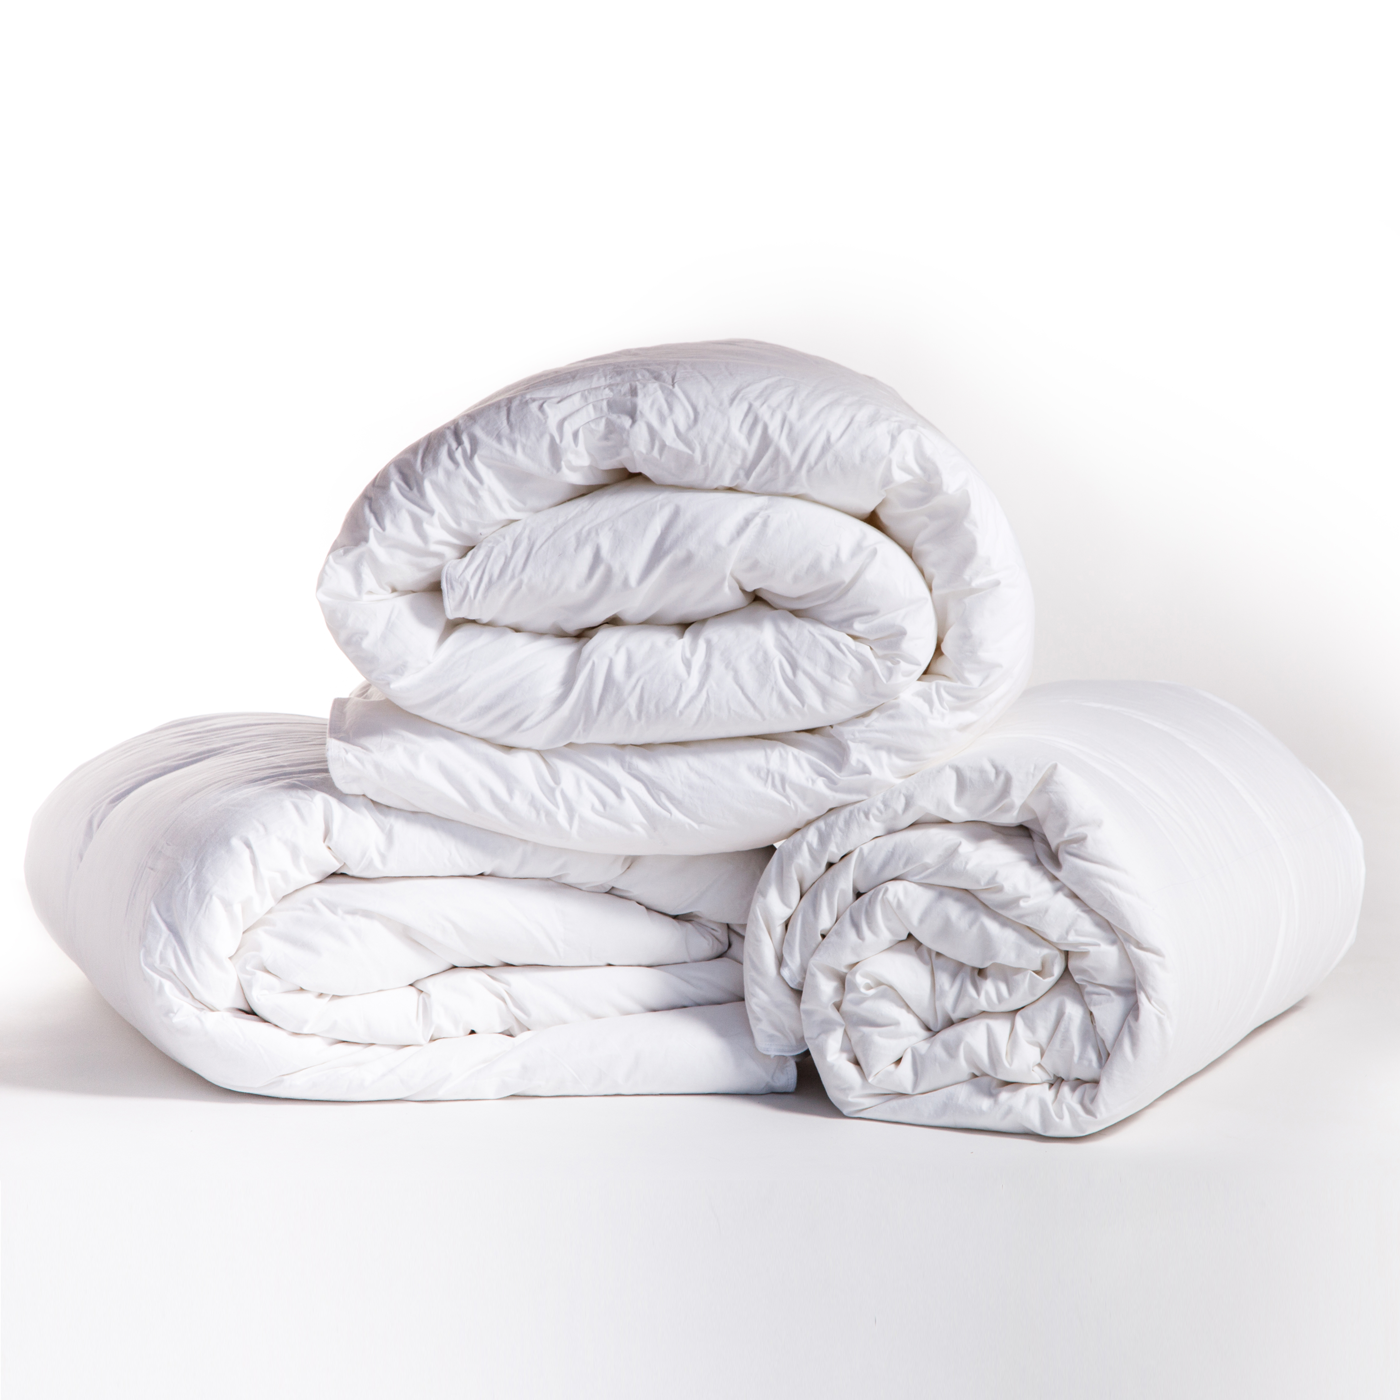 This Spring Weight Duvet Insert by Pom Pom at Home is a cozy dream made of 100% cambric cotton lining and is hypoallergenic. Perfect for those who live in warmer climates  Fill: 600 Fill Power Premium White Duck Down  Twin - 68"x88" Queen - 92"x96"  King - 106"x96"